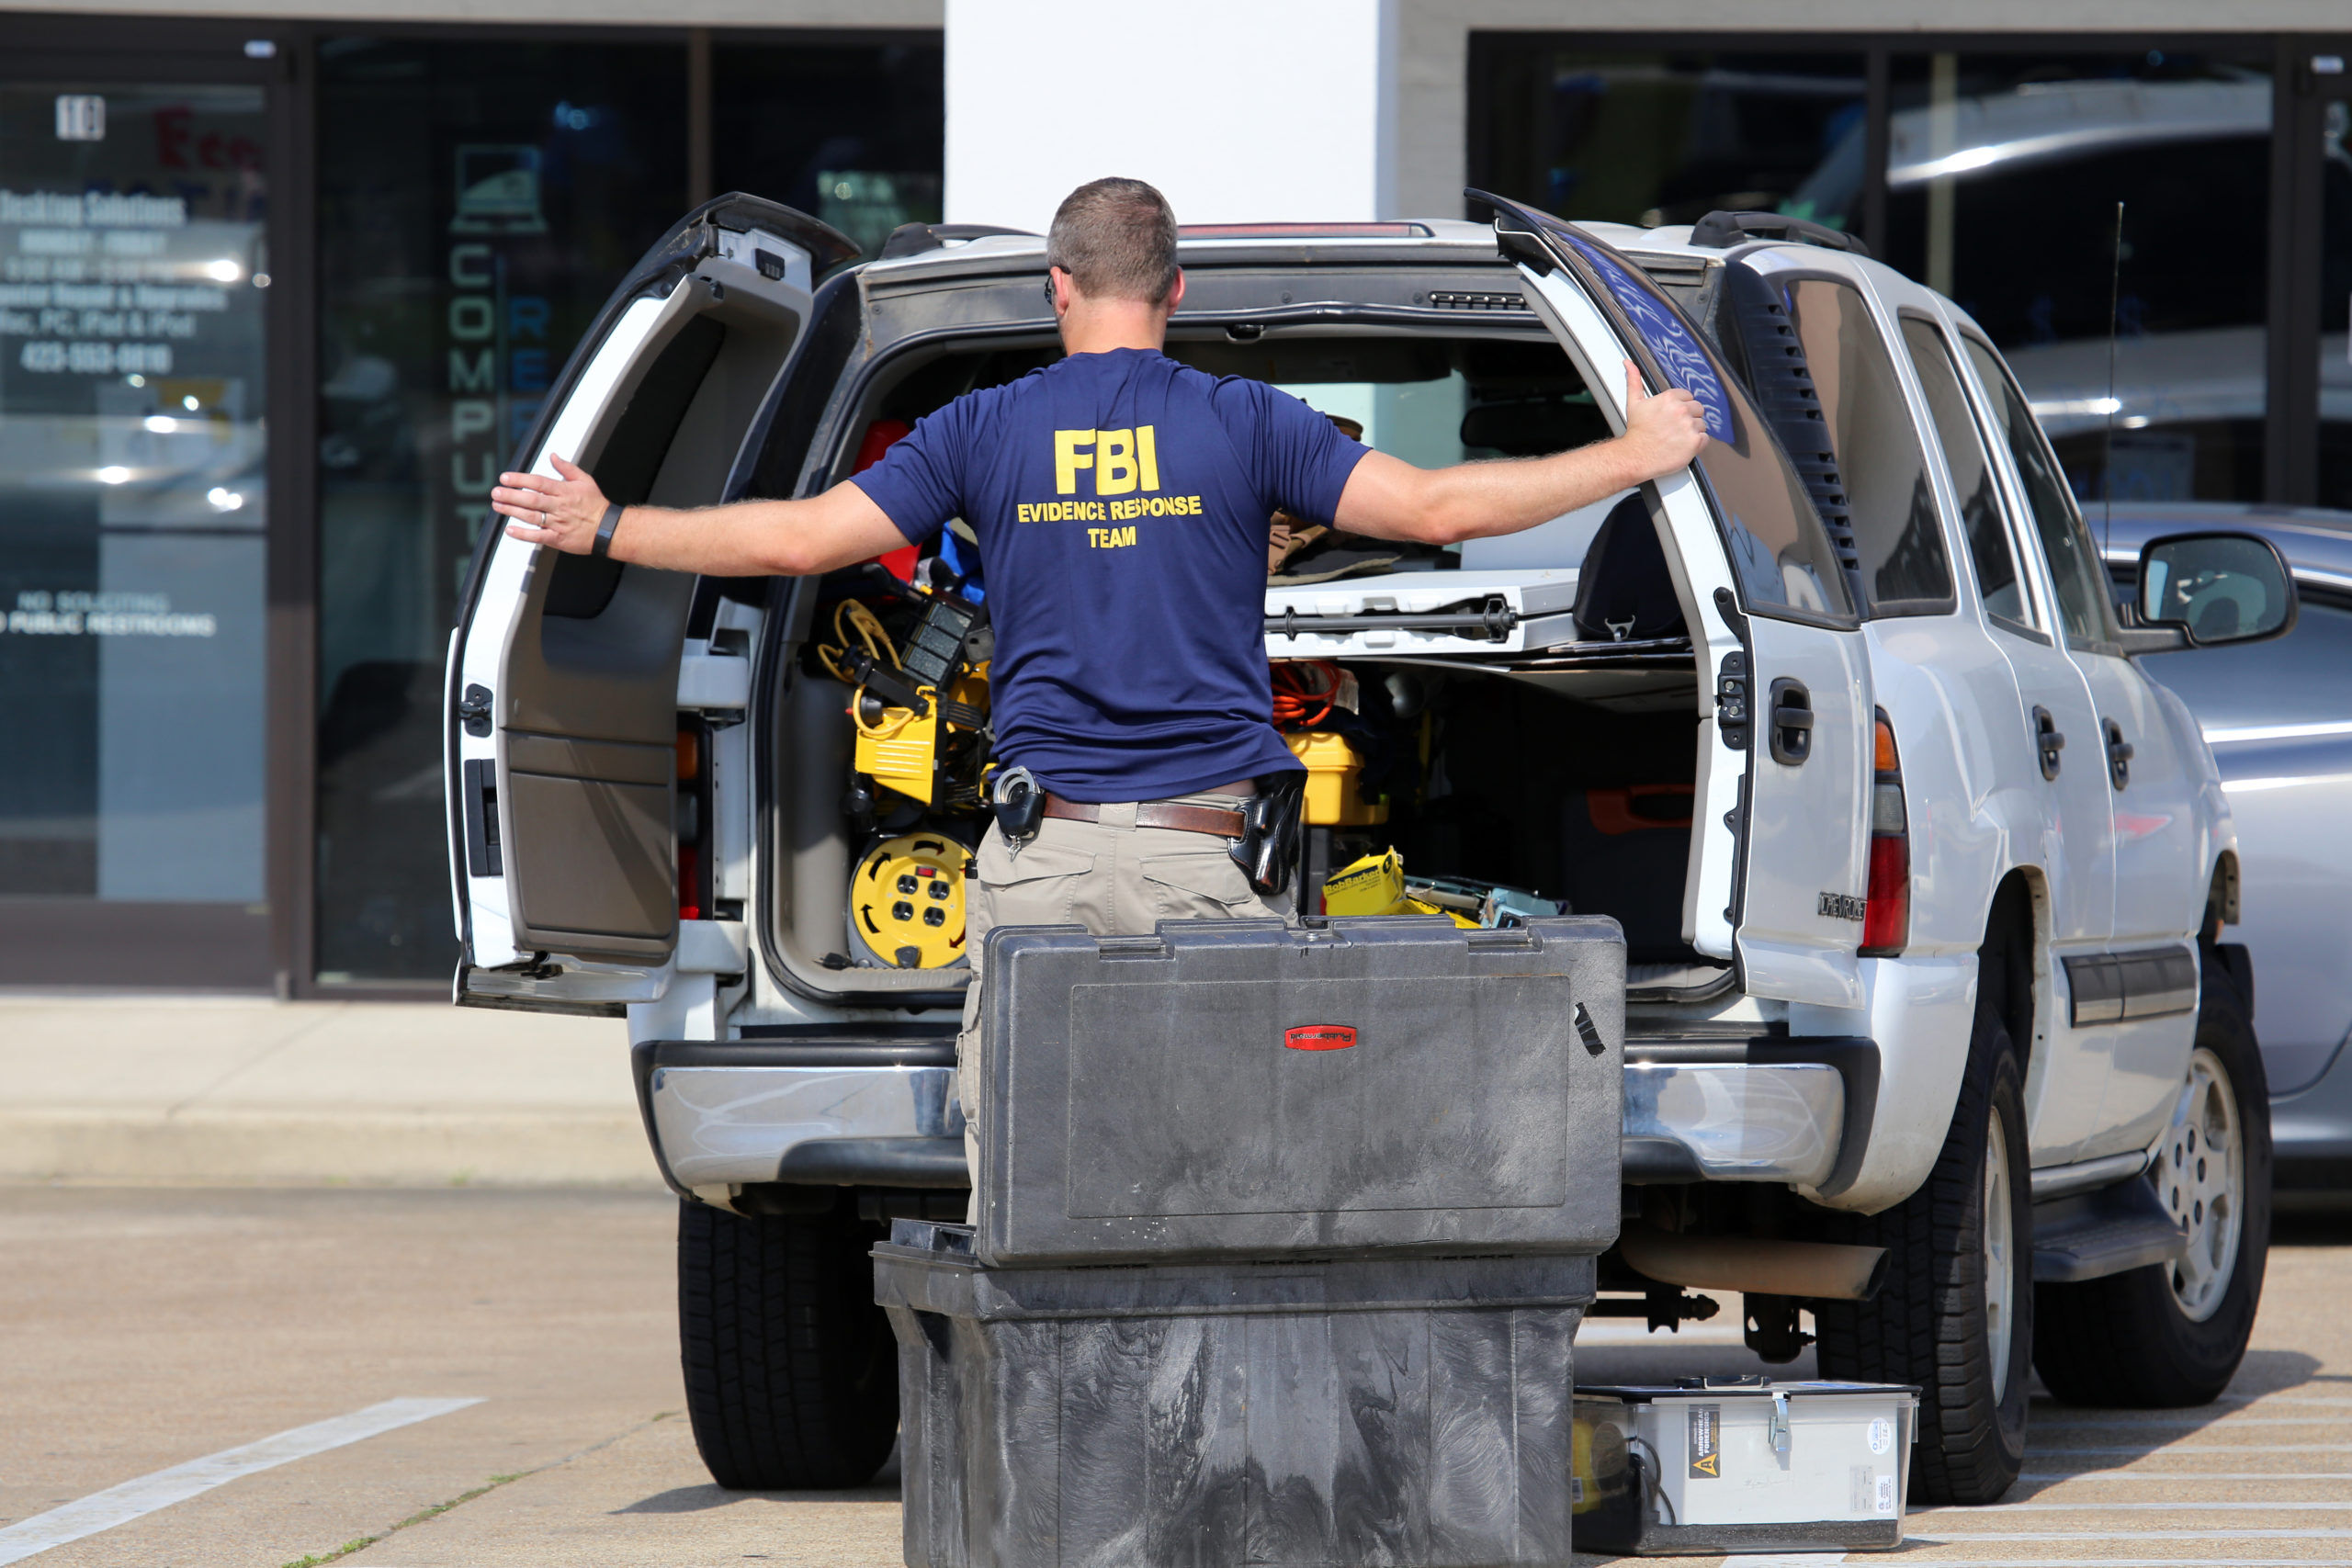 An FBI agent gathers evidence at the Armed Forces Career Center in Chattanooga, TN on July 18, 2015. An attack on the center was carried out on July 16th, 2015.